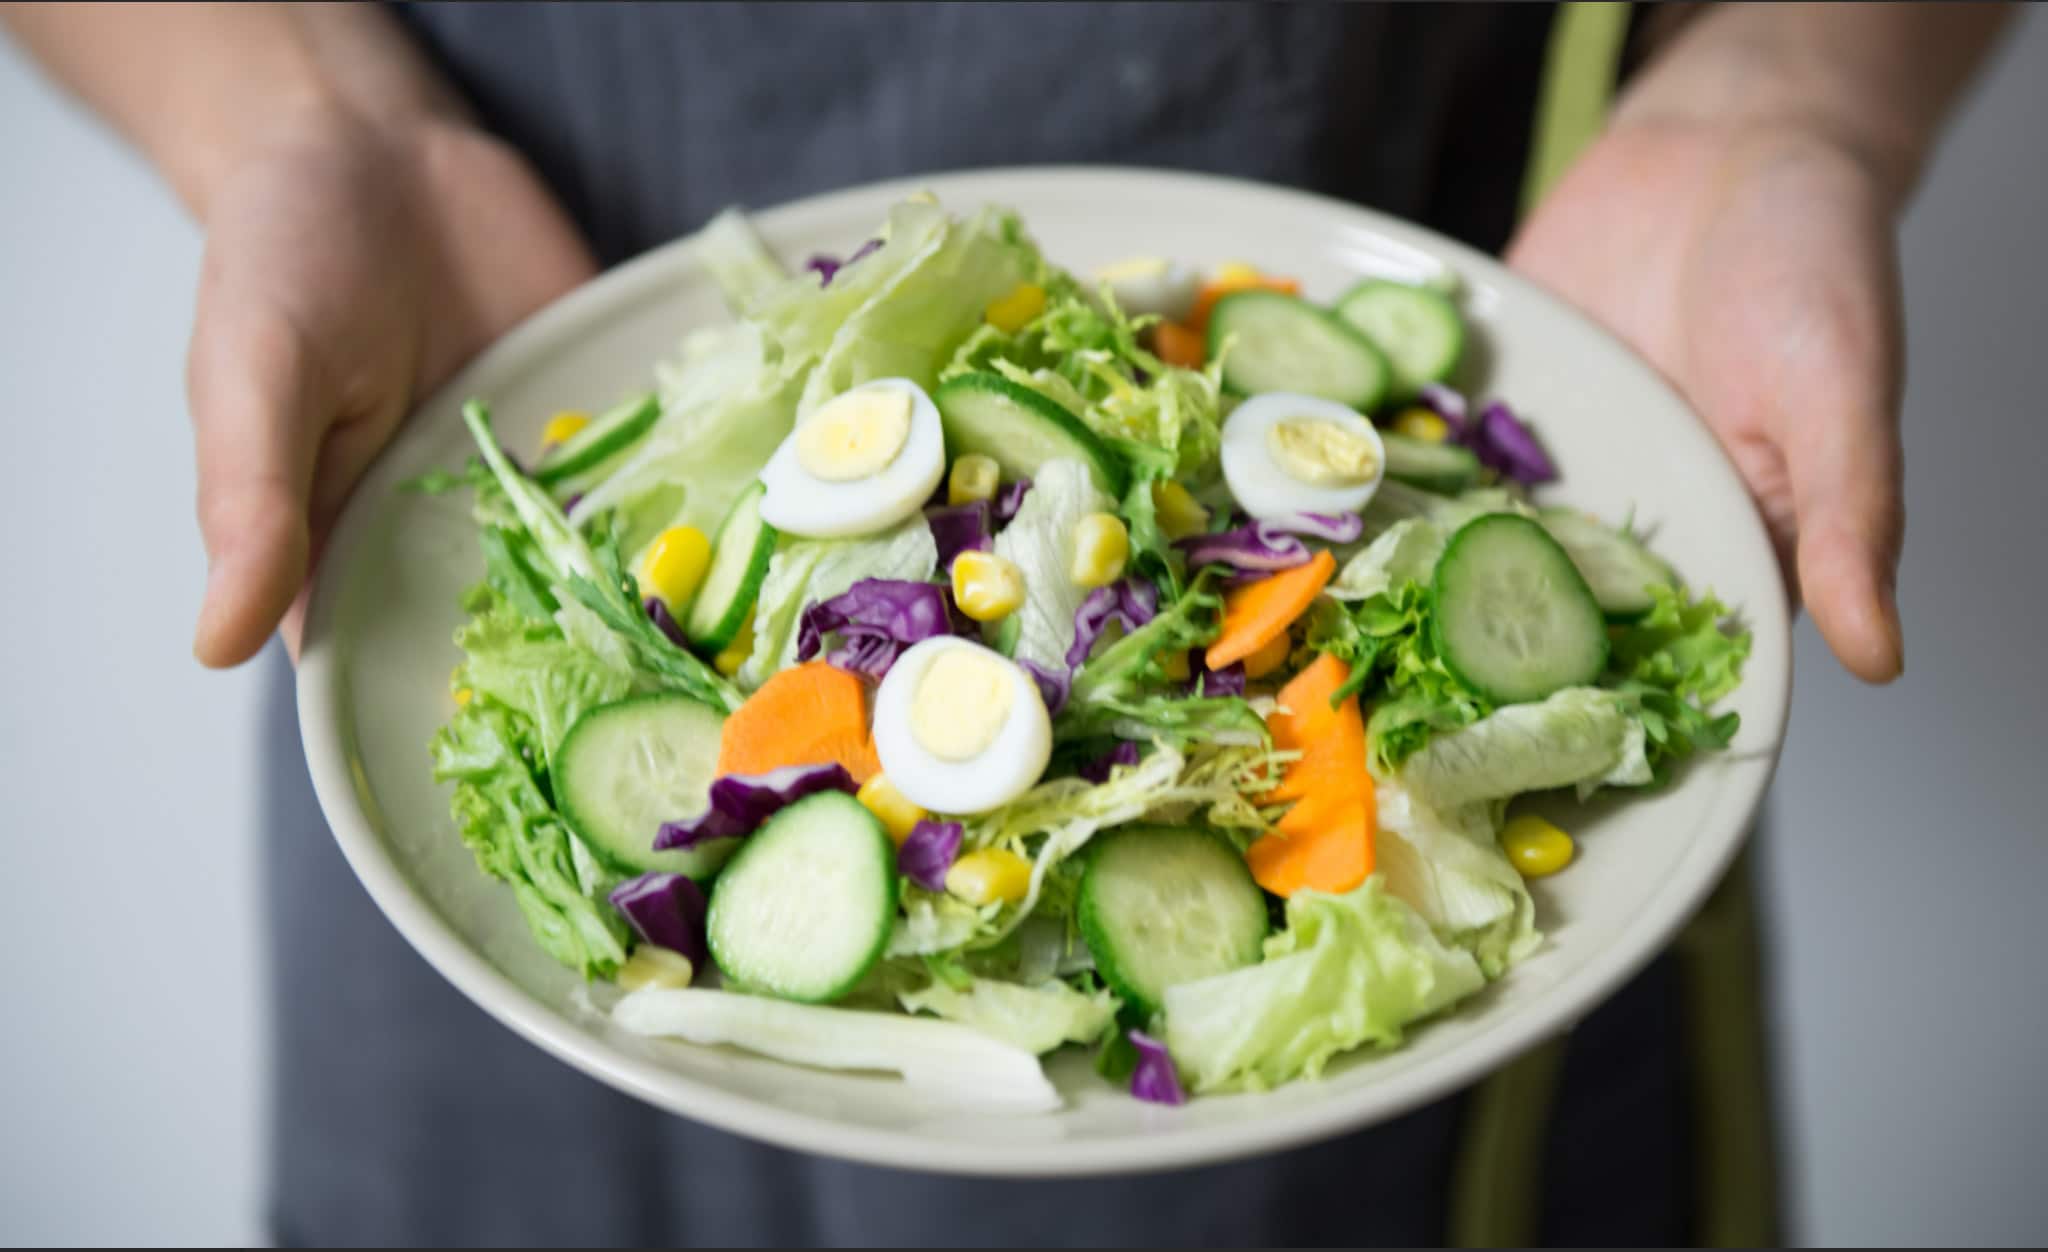 Paleo pegan diet salad with vegetable ingredients of lettuce, eggs, carrots, and corn.